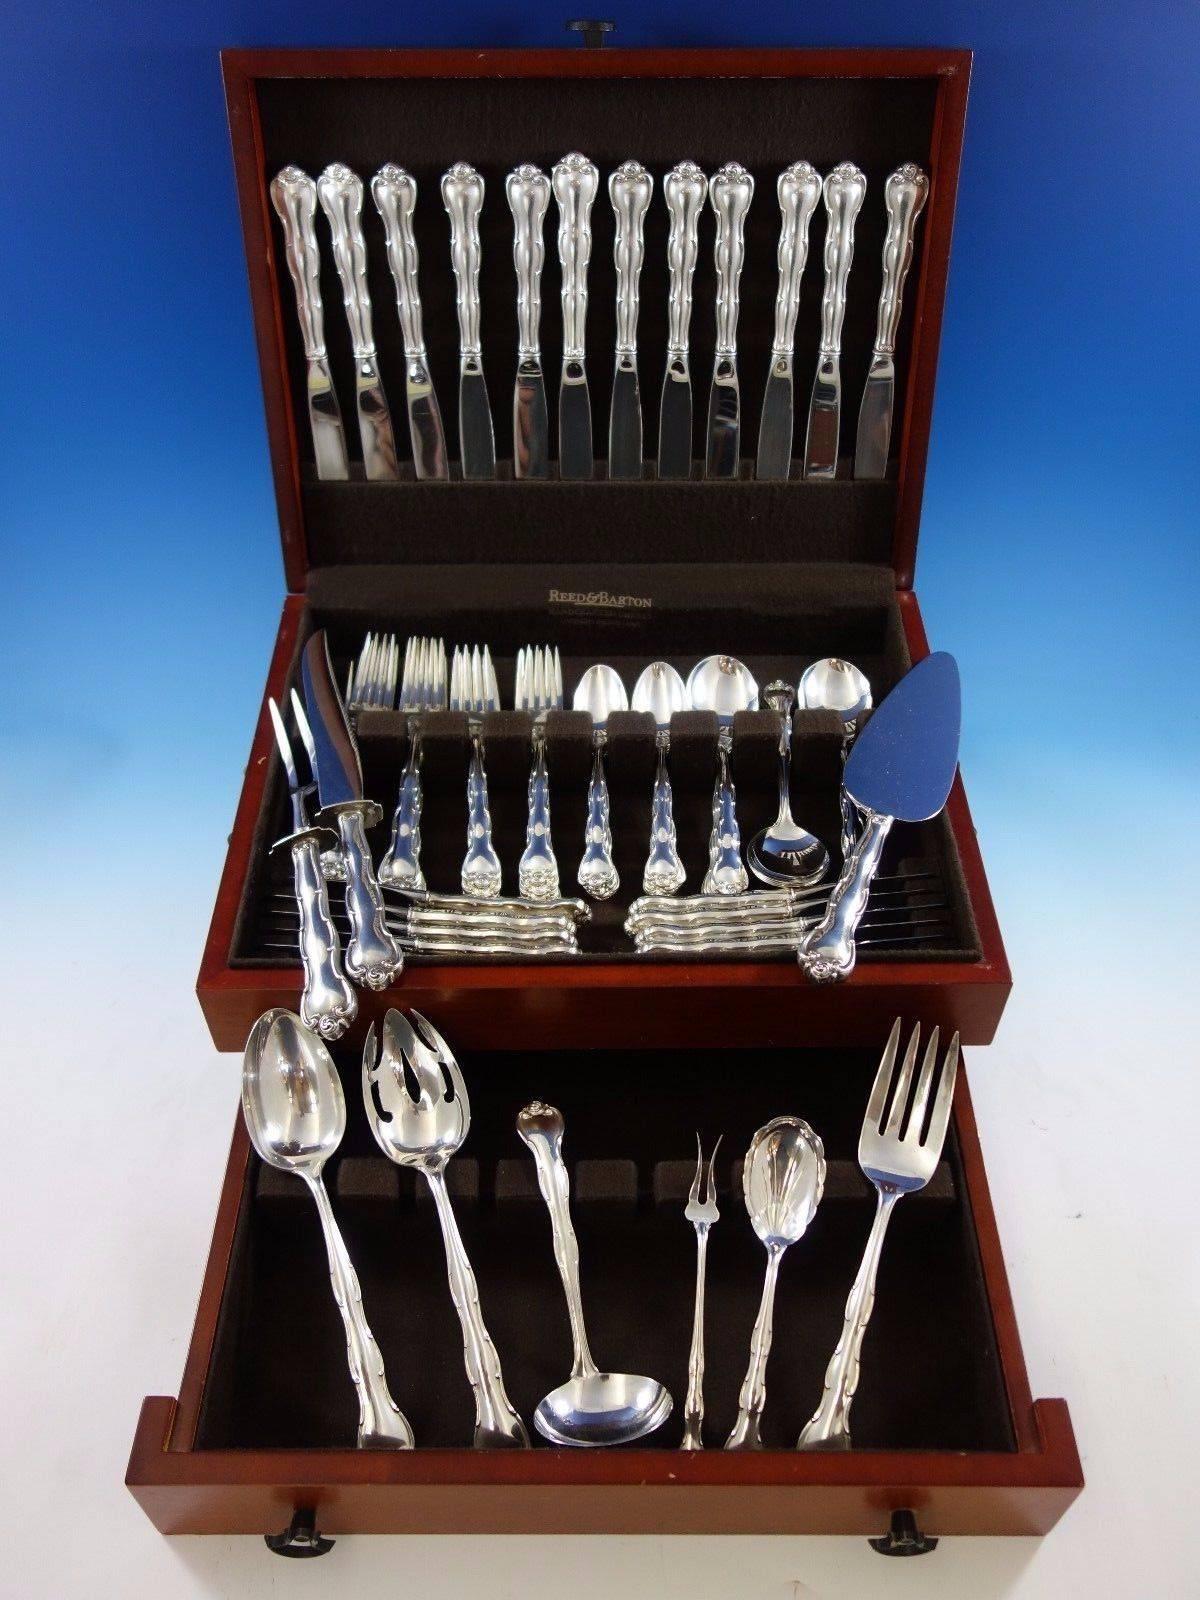 Rondo by Gorham sterling silver flatware set of 81 pieces. This set includes: 

12 knives, 8 7/8